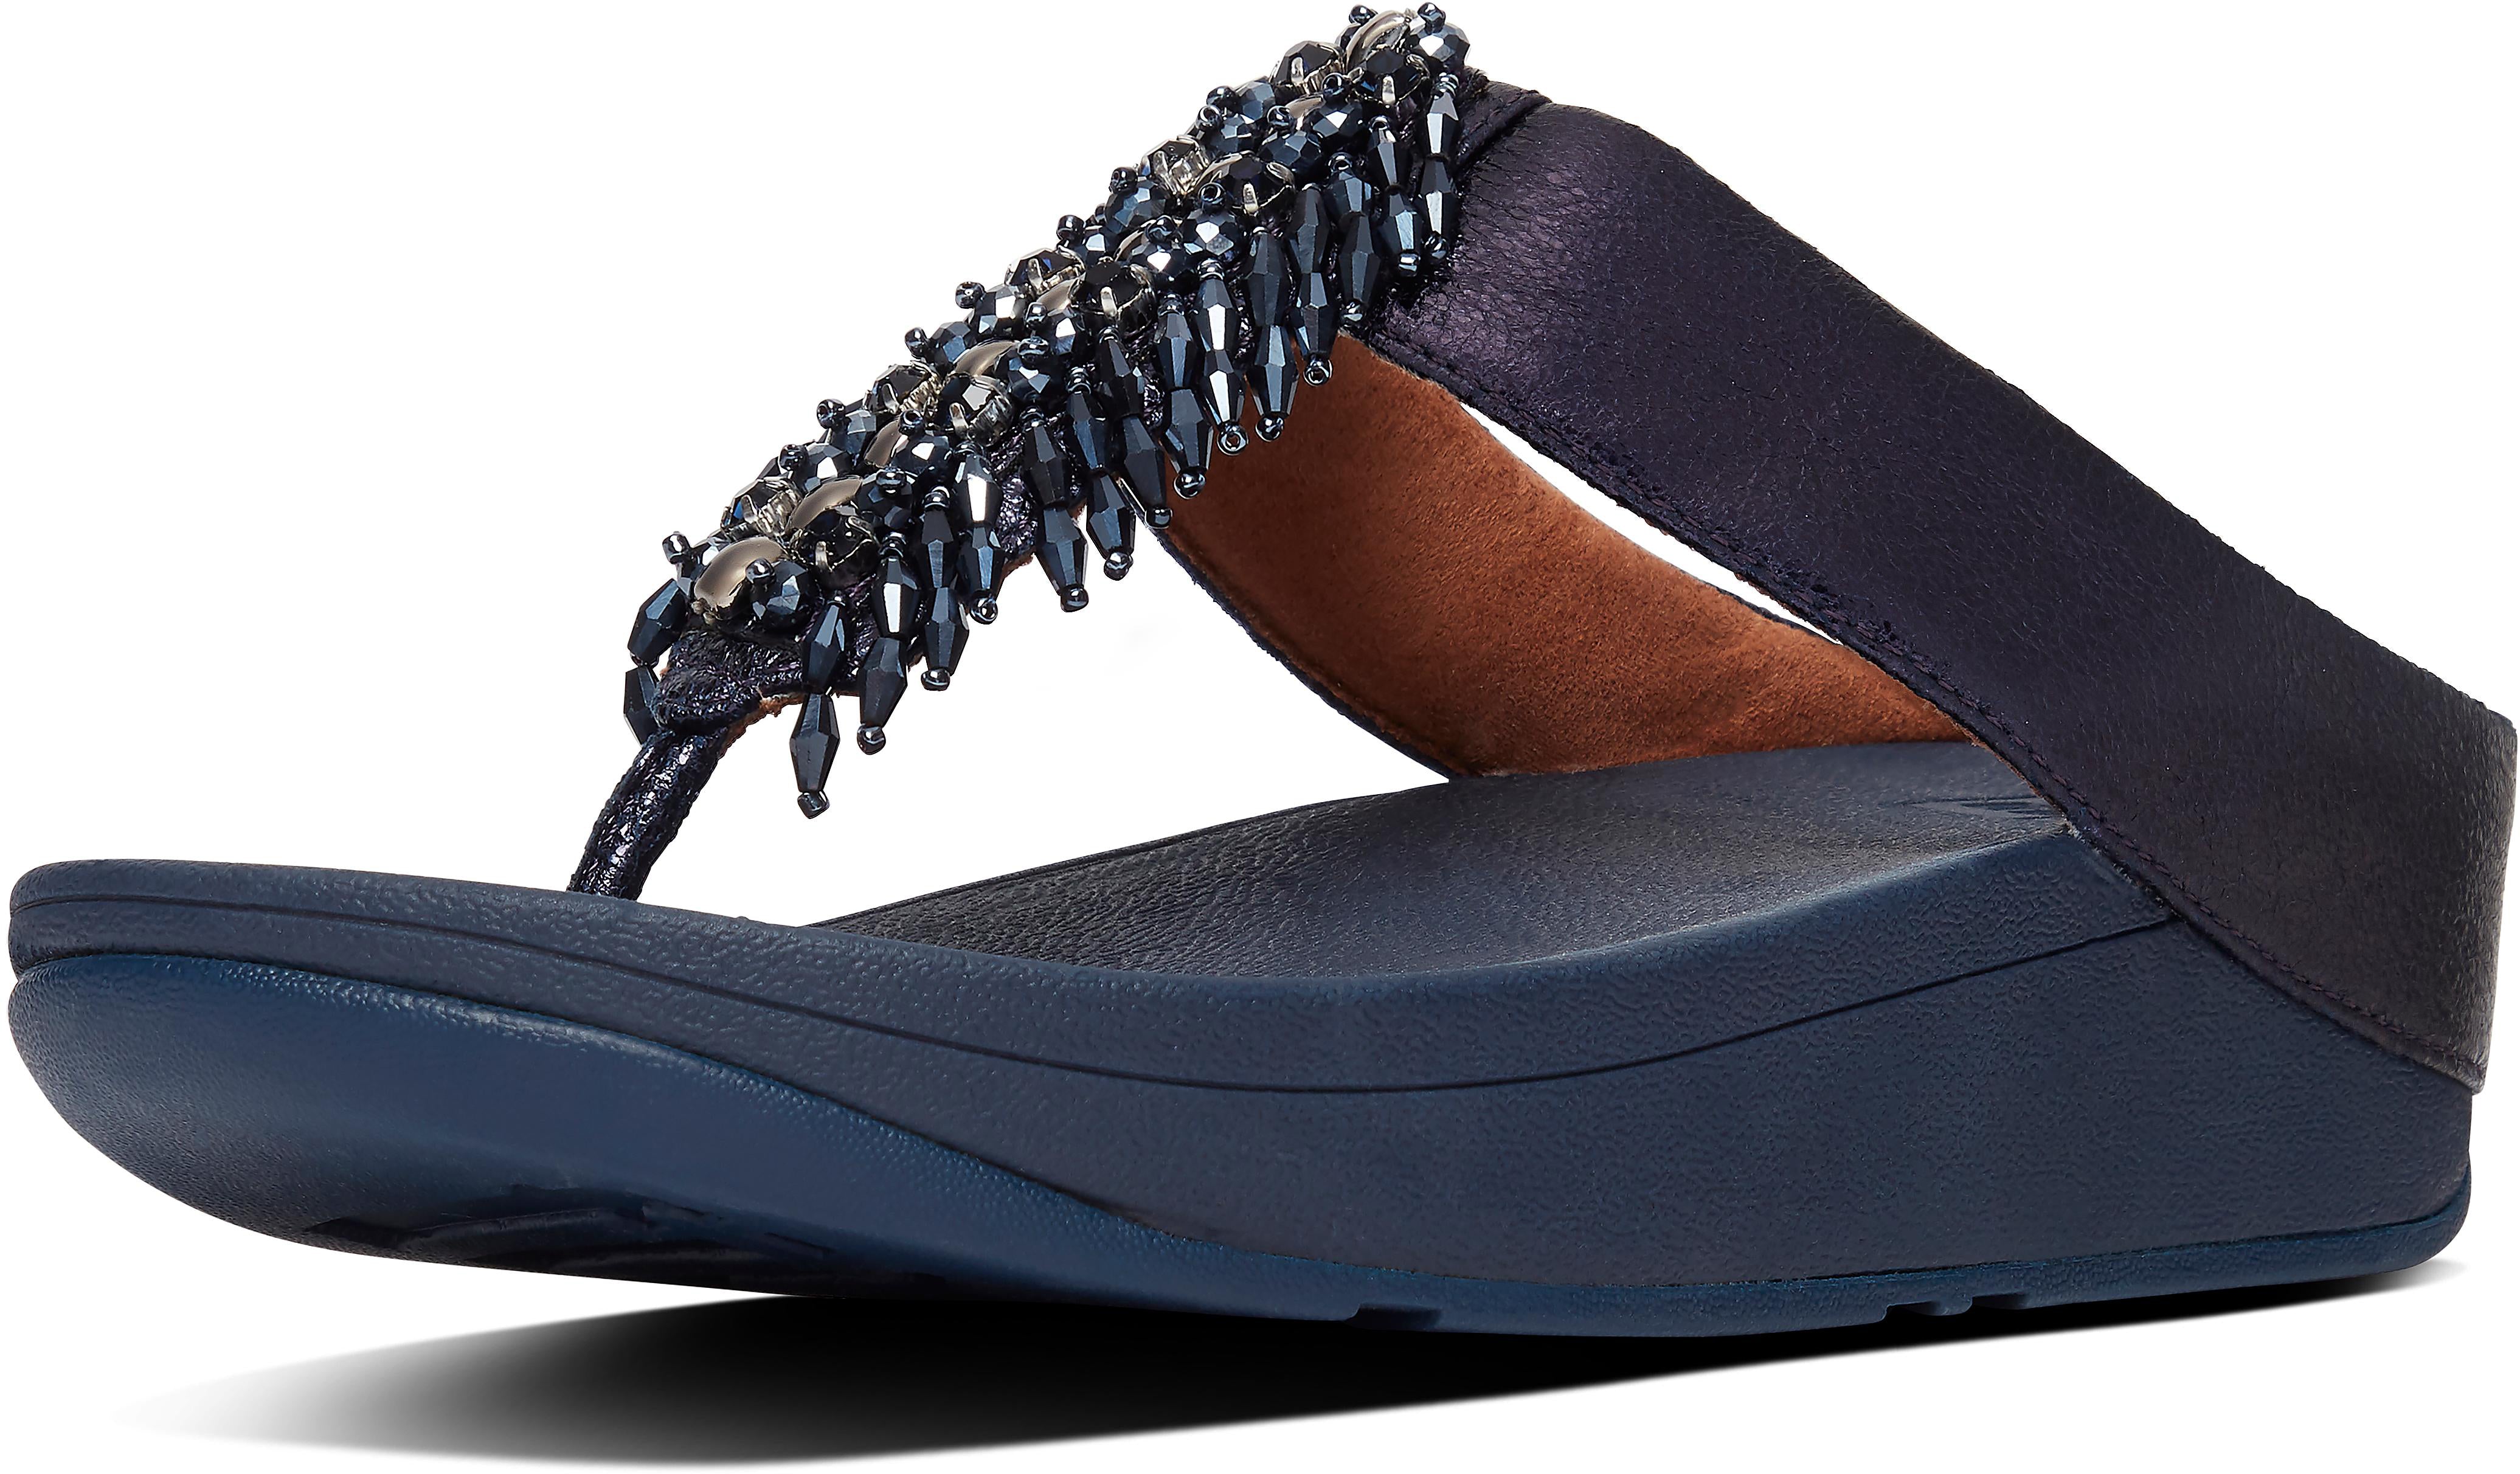 Velma Adorn Toe-Thongs in Midnight Navy from the side